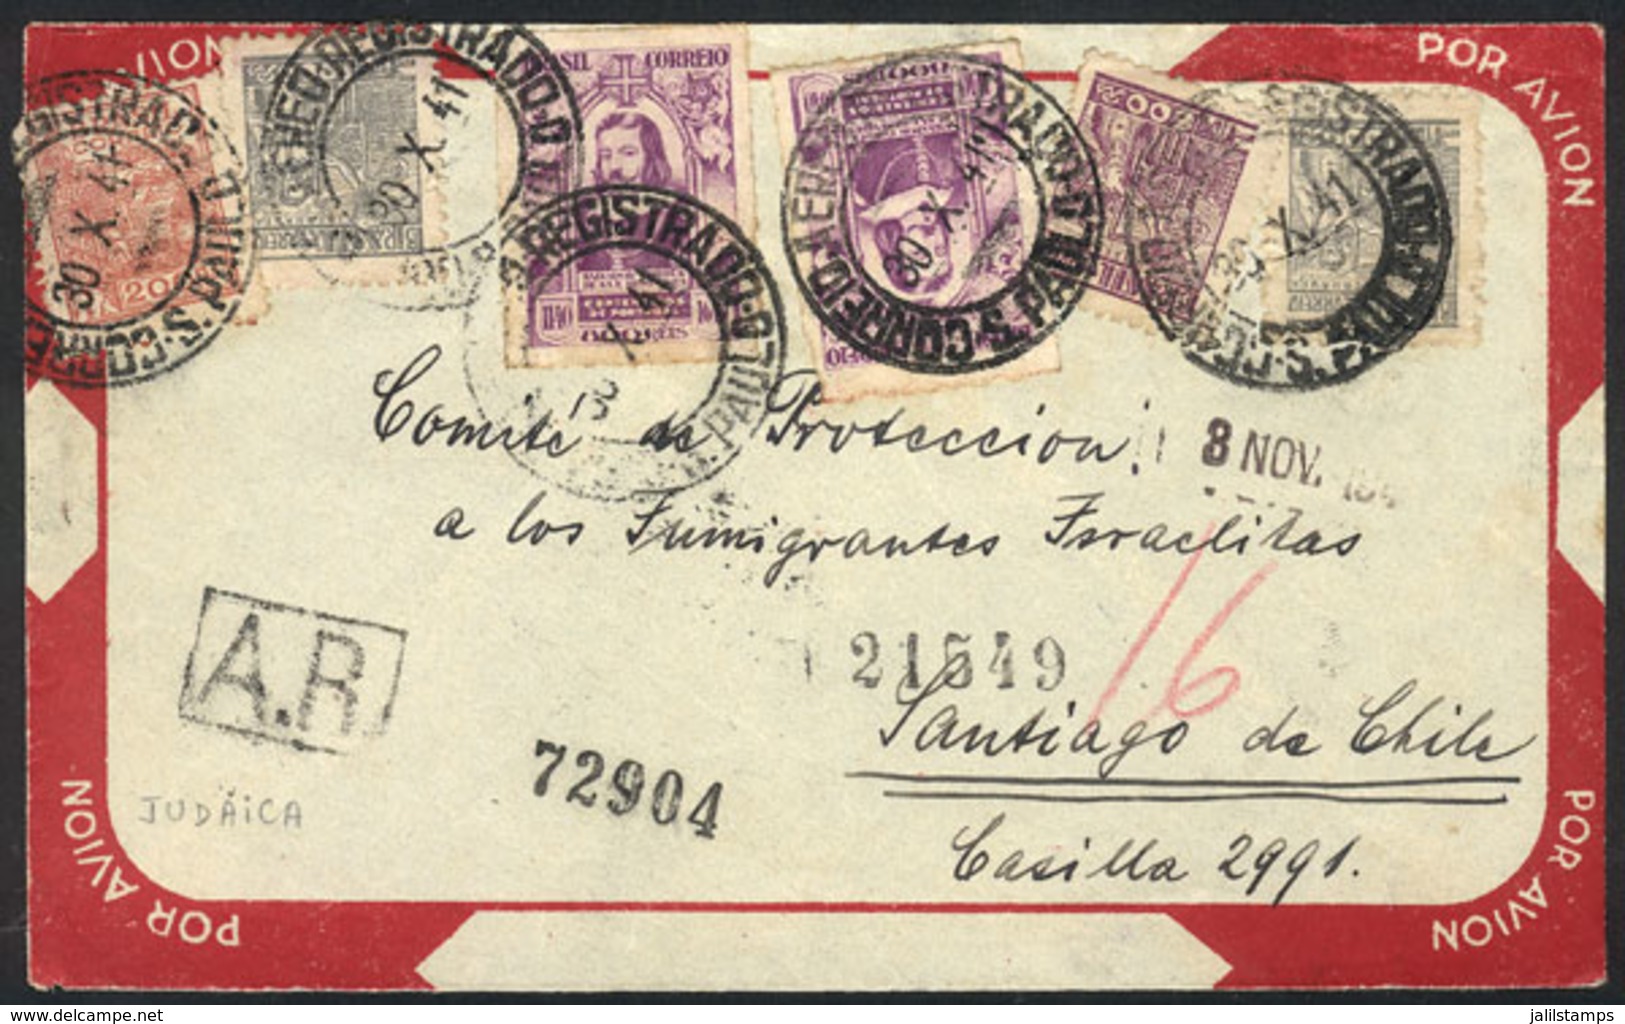 BRAZIL: Airmail Cover Sent From Sao Paulo To Chile On 30/OC/1941, Nice Postage, VF Quality! - Covers & Documents